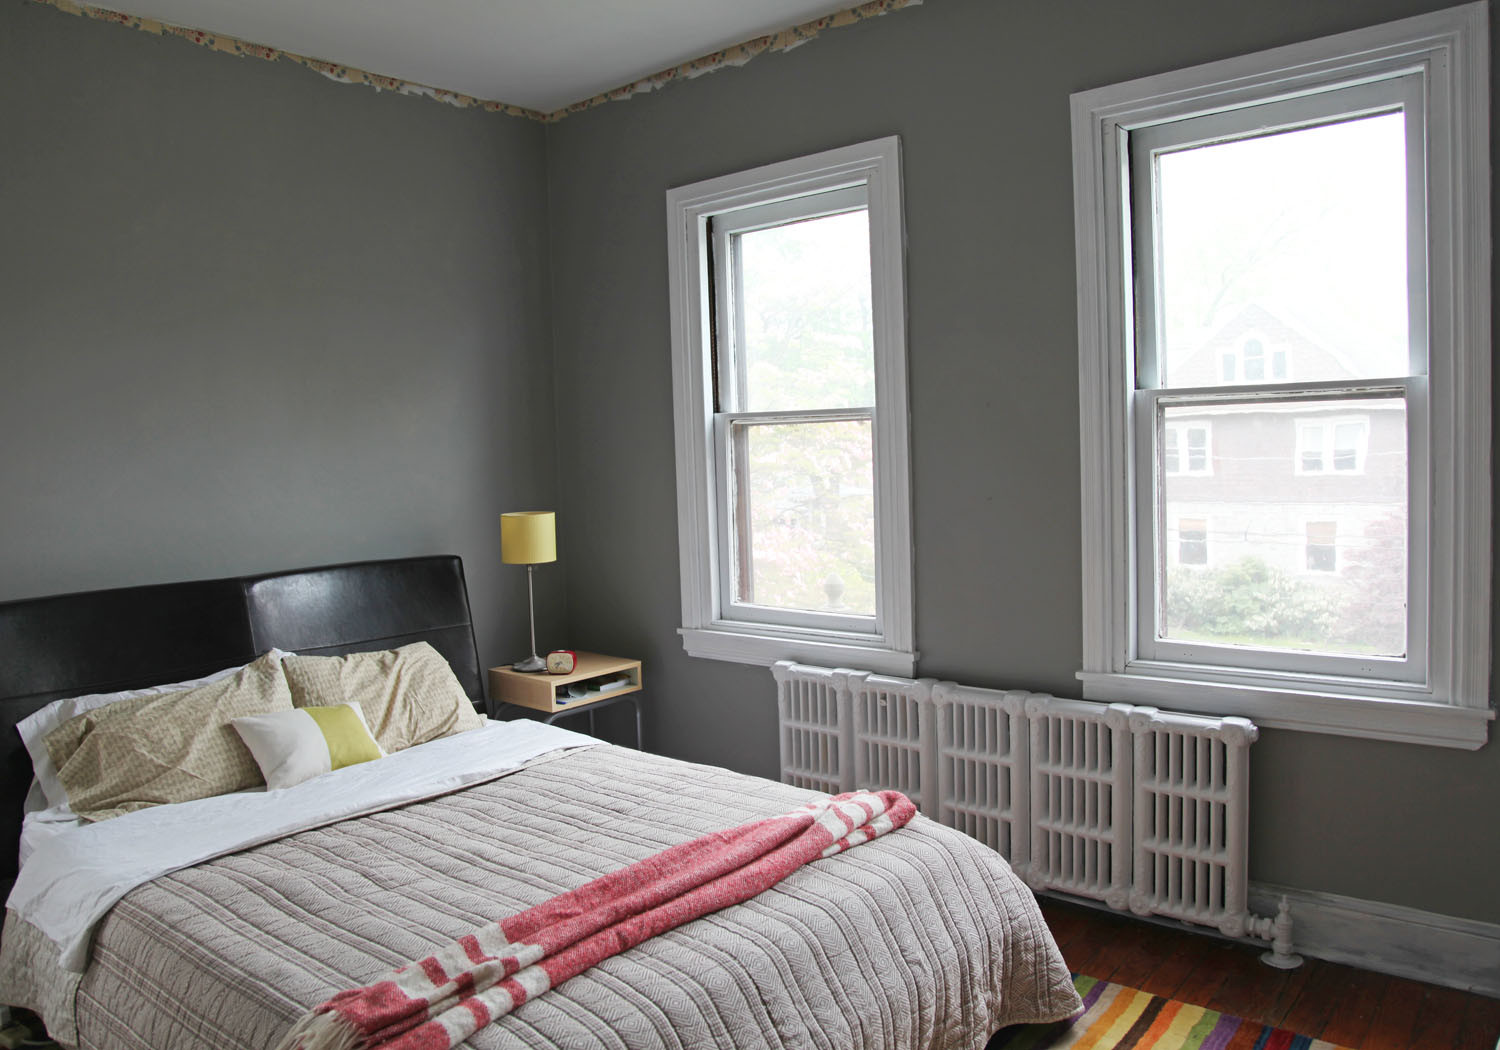 Bedroom Wall Colors
 Master Bedroom New Gray Wall Color & White Trim